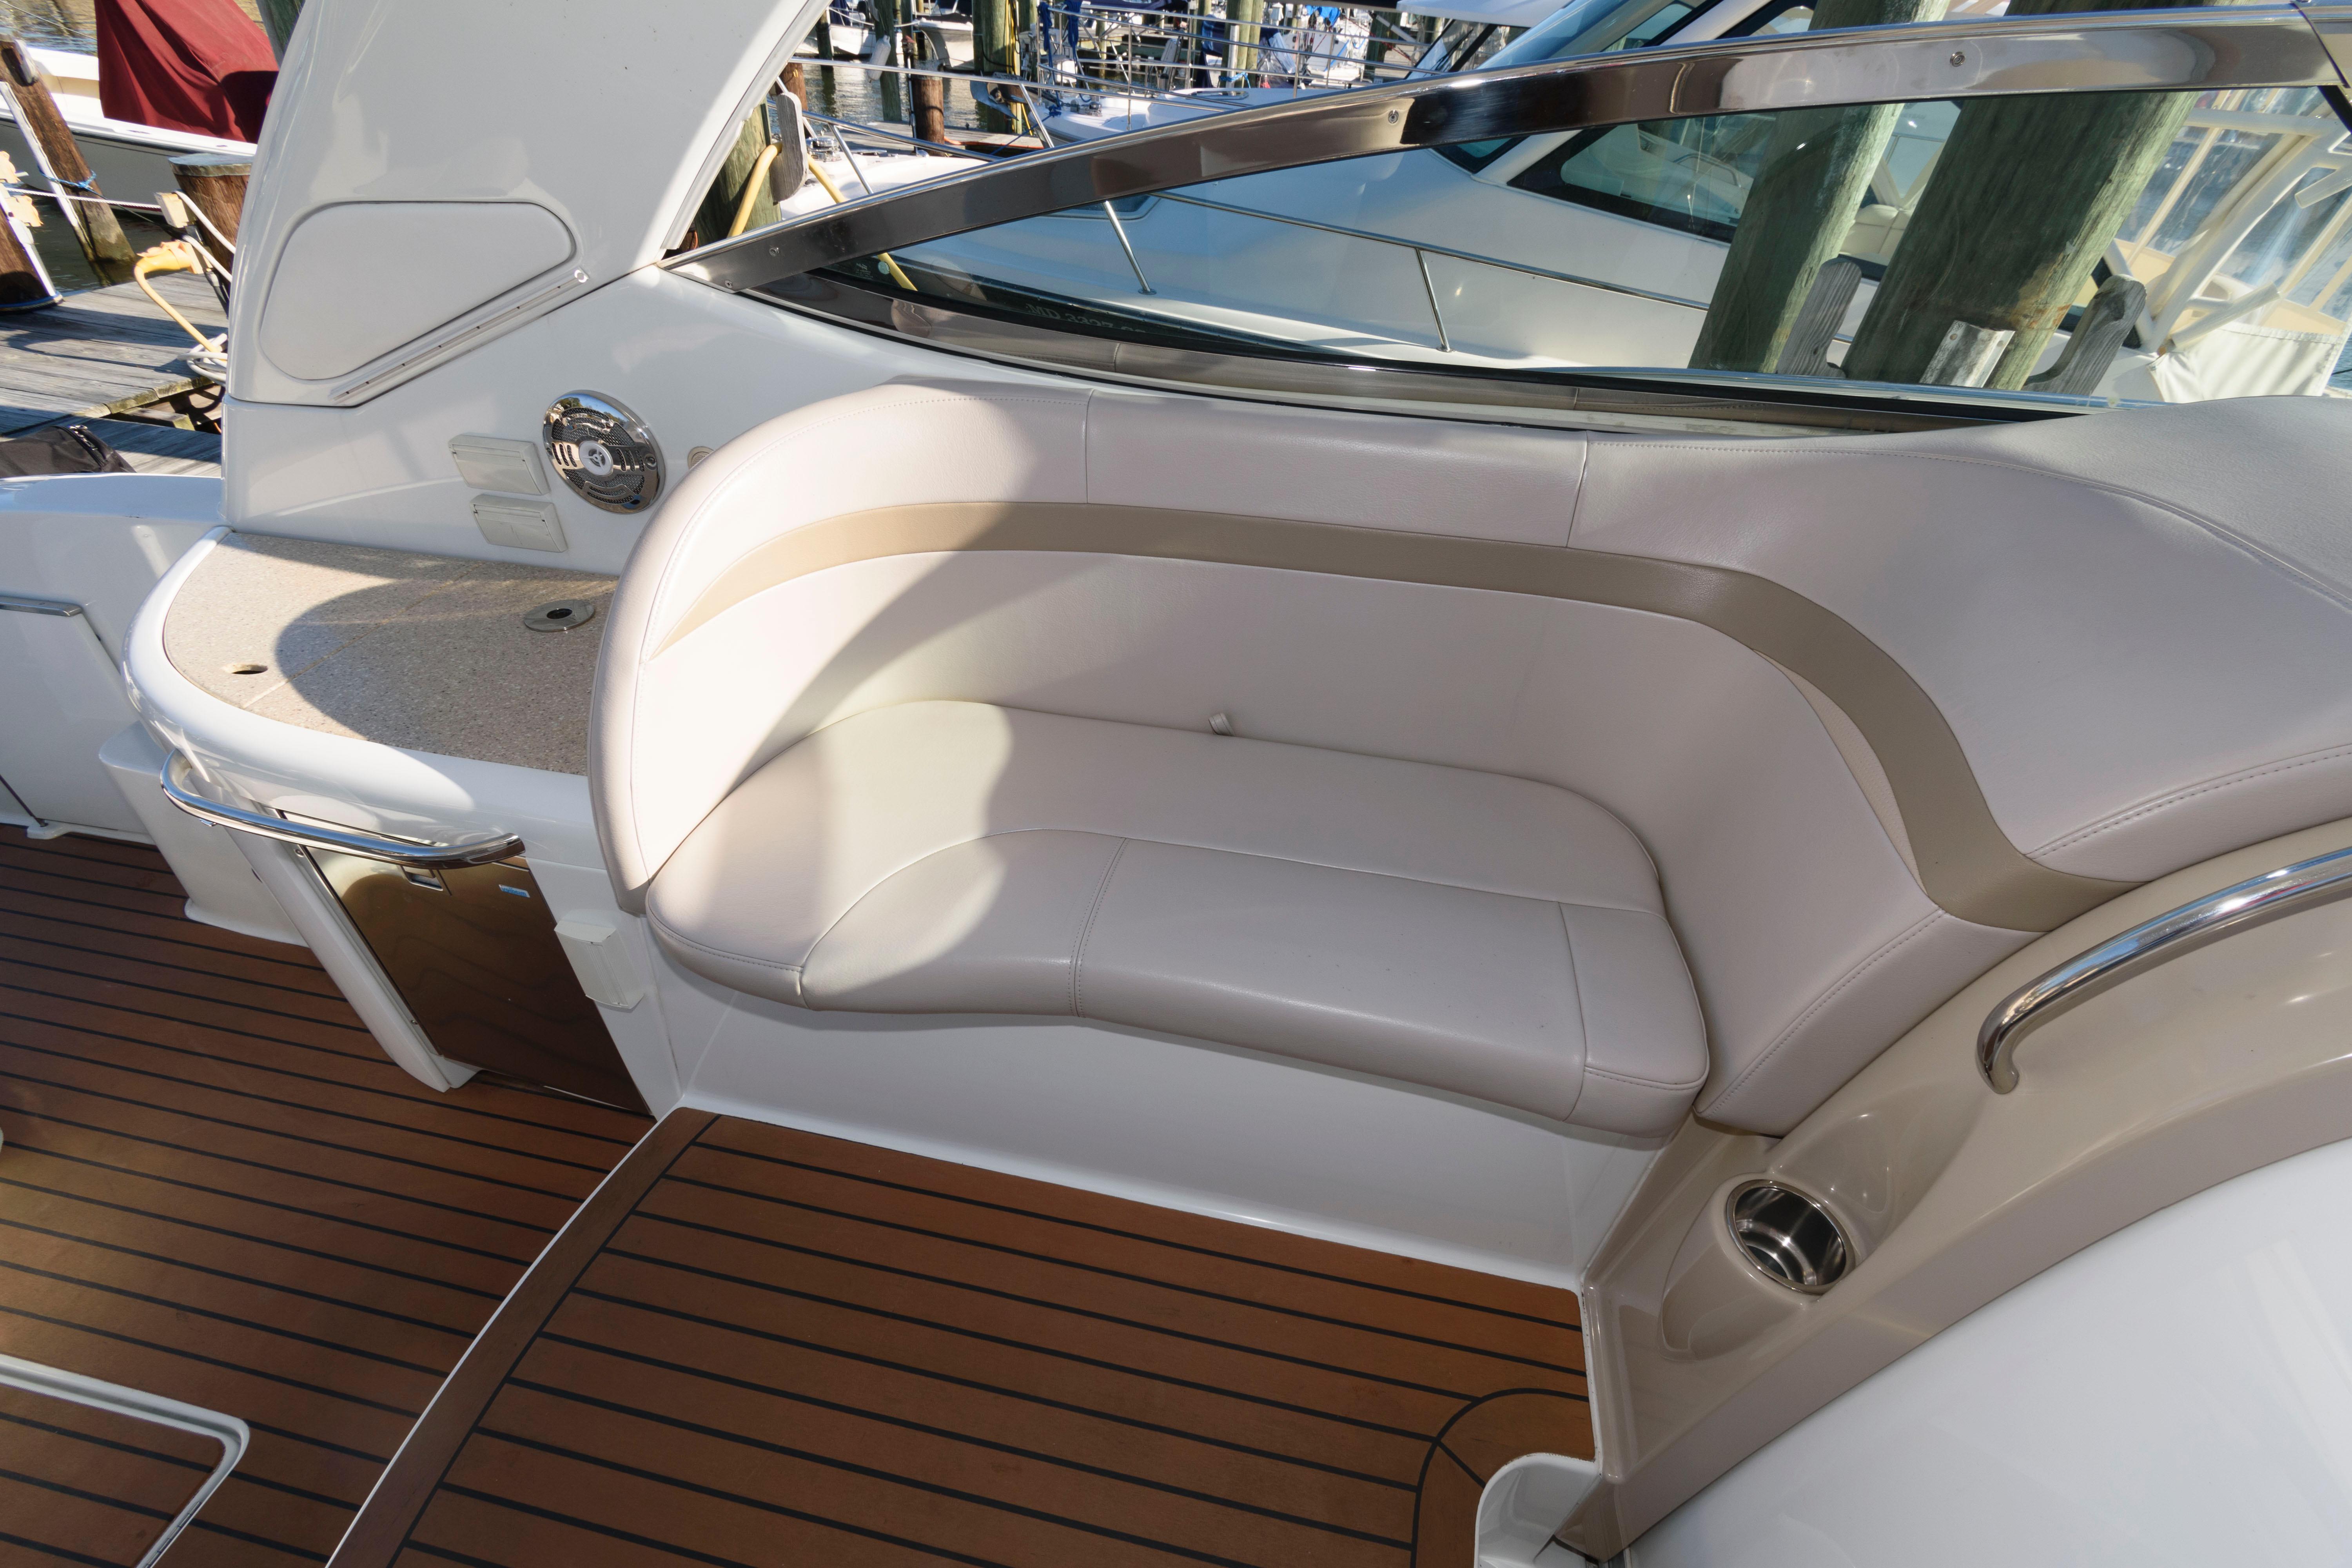 M 6639 RD Knot 10 Yacht Sales